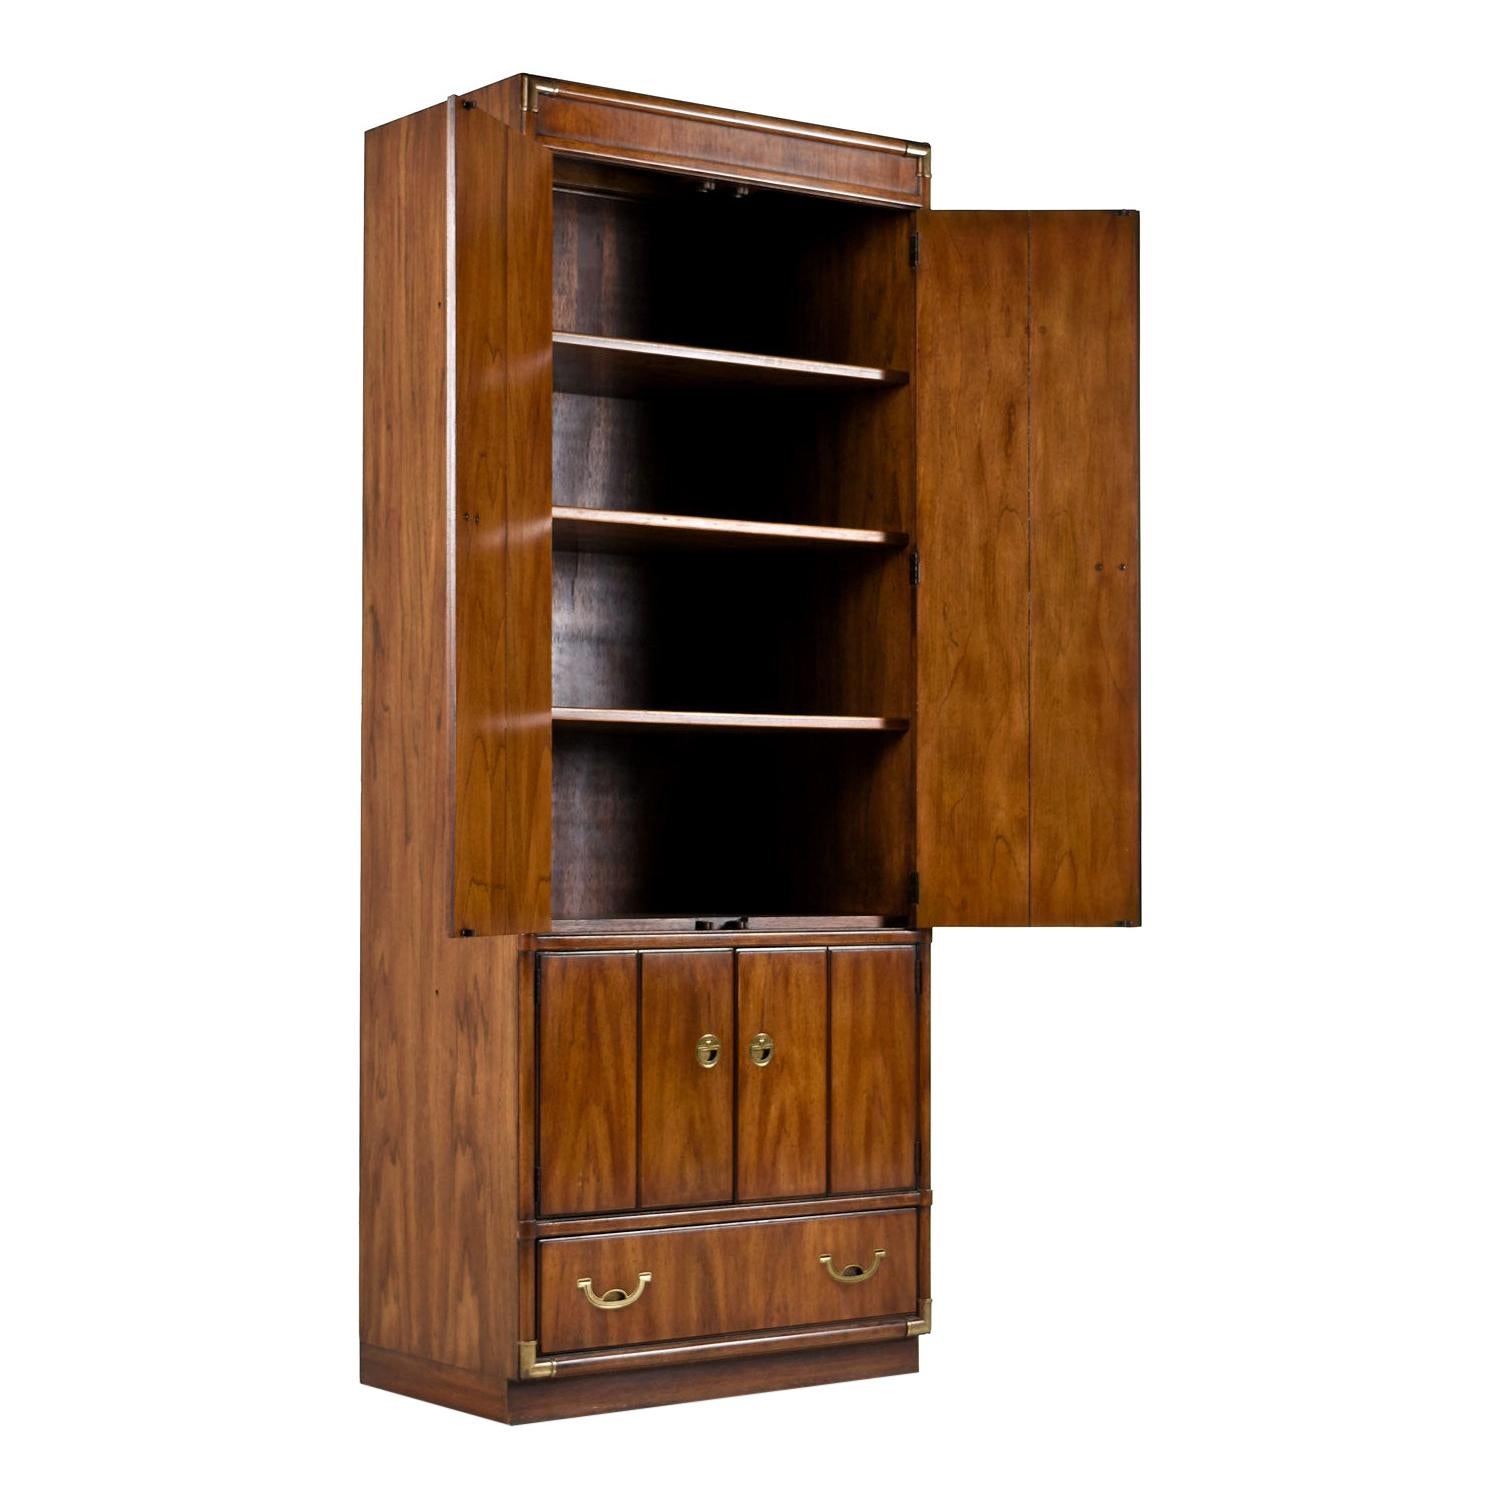 Solid wood Campaign style corner cabinet curio bookshelf made by esteemed US furniture maker Drexel Heritage in the 1970s. Faux bamboo brass corner accents on all four corners and brass pull hardware tie together British traditional and Eastern